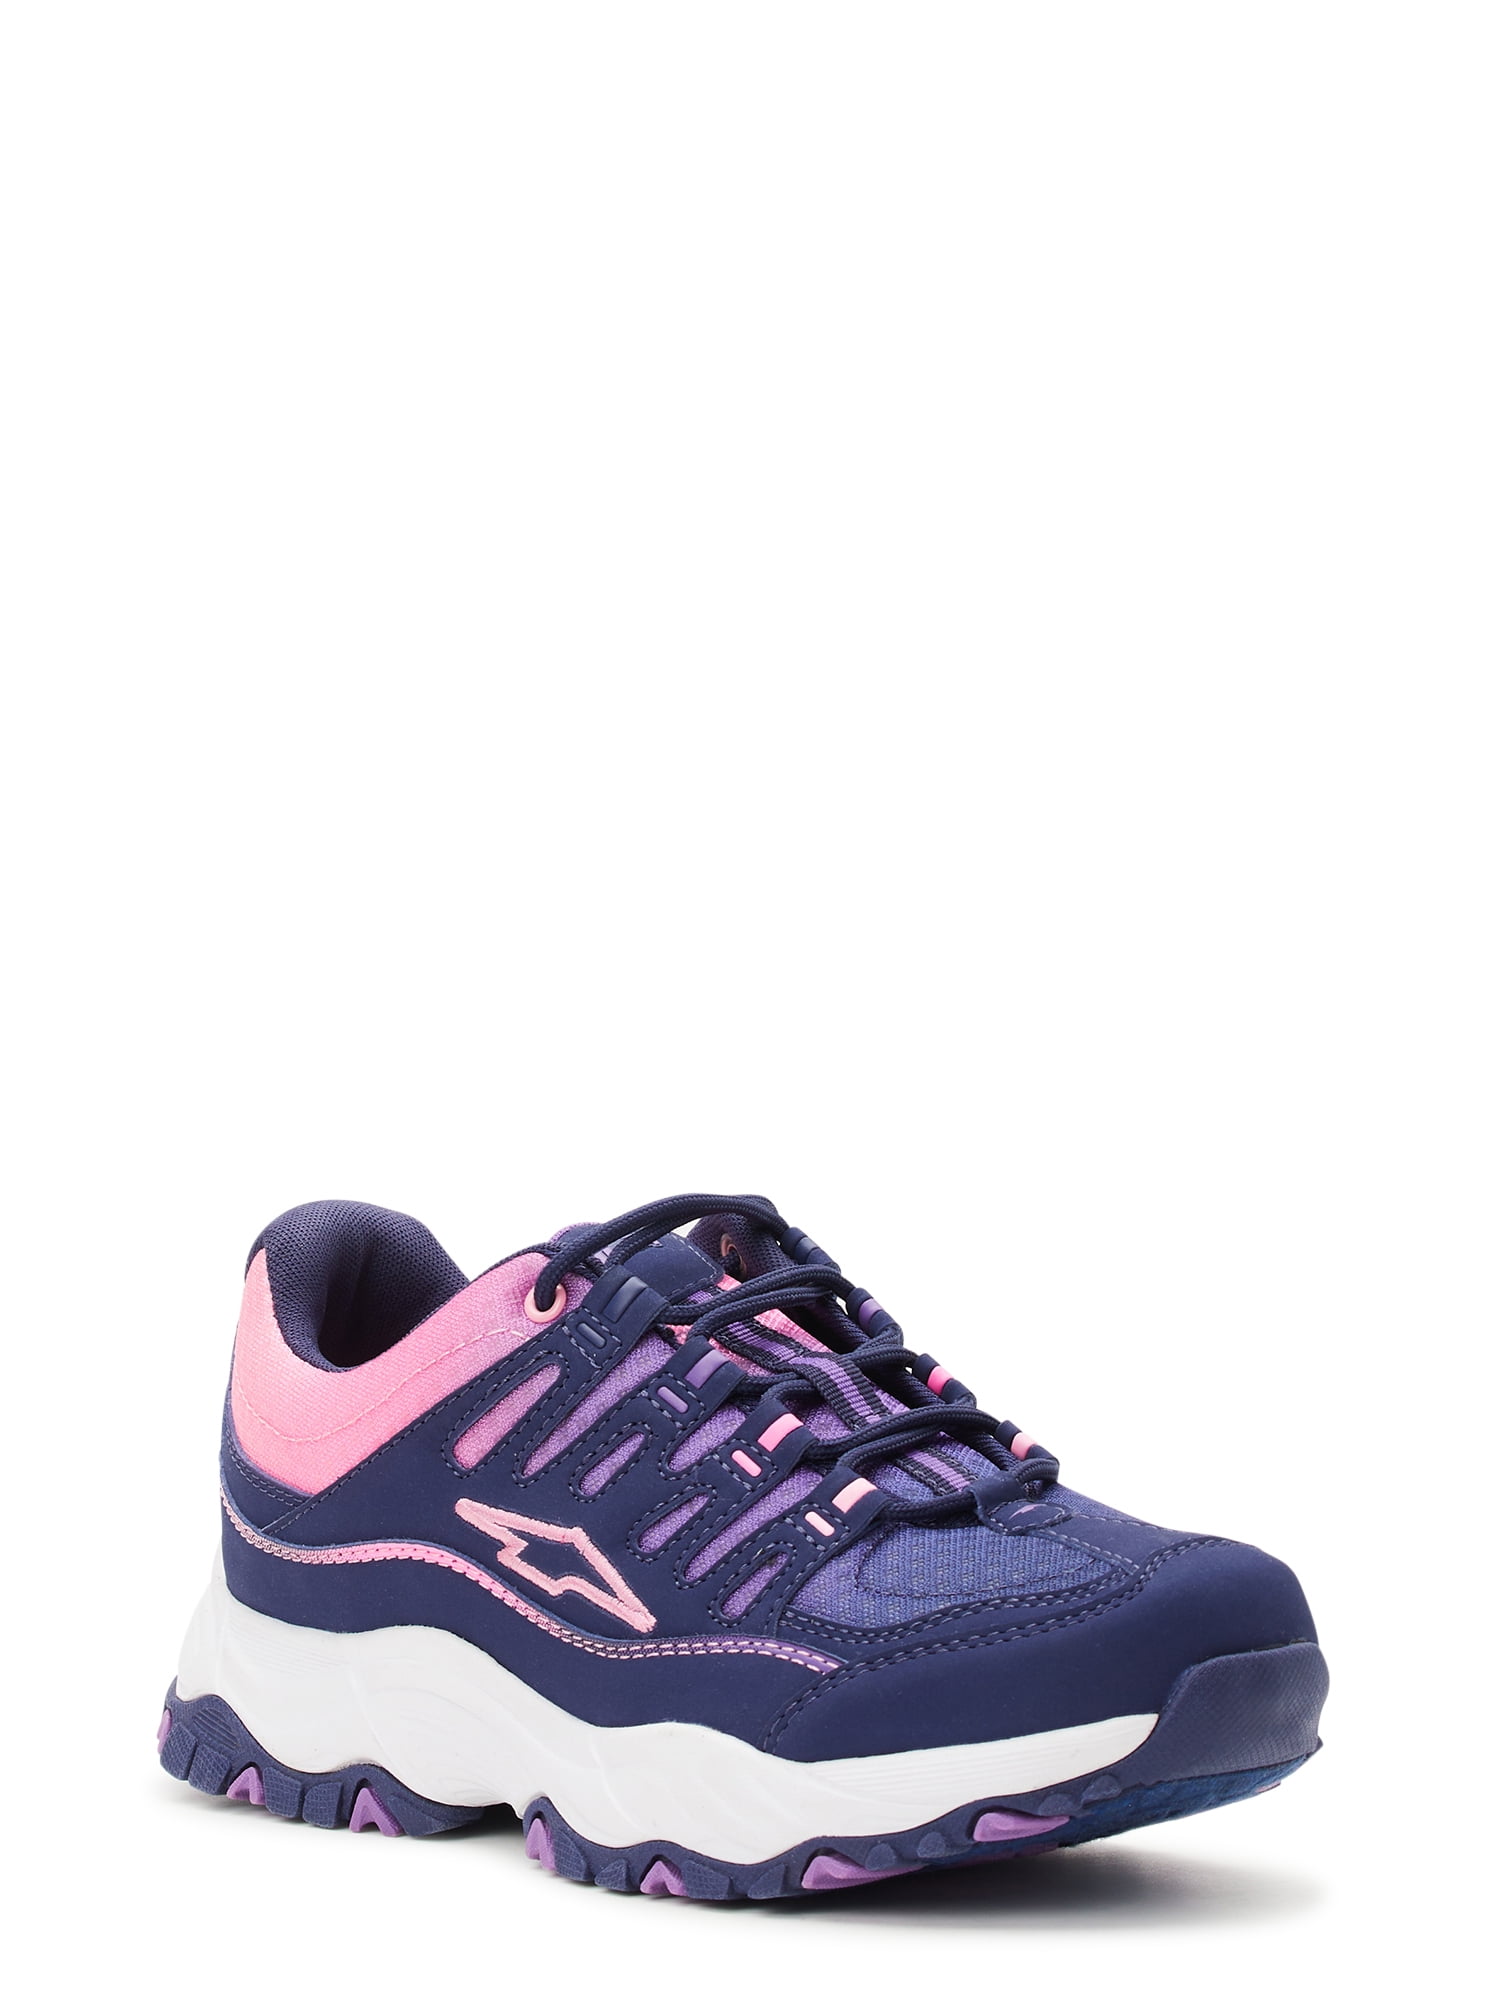 Avia Women's Purple Low Impact Twisted Back and 23 similar items